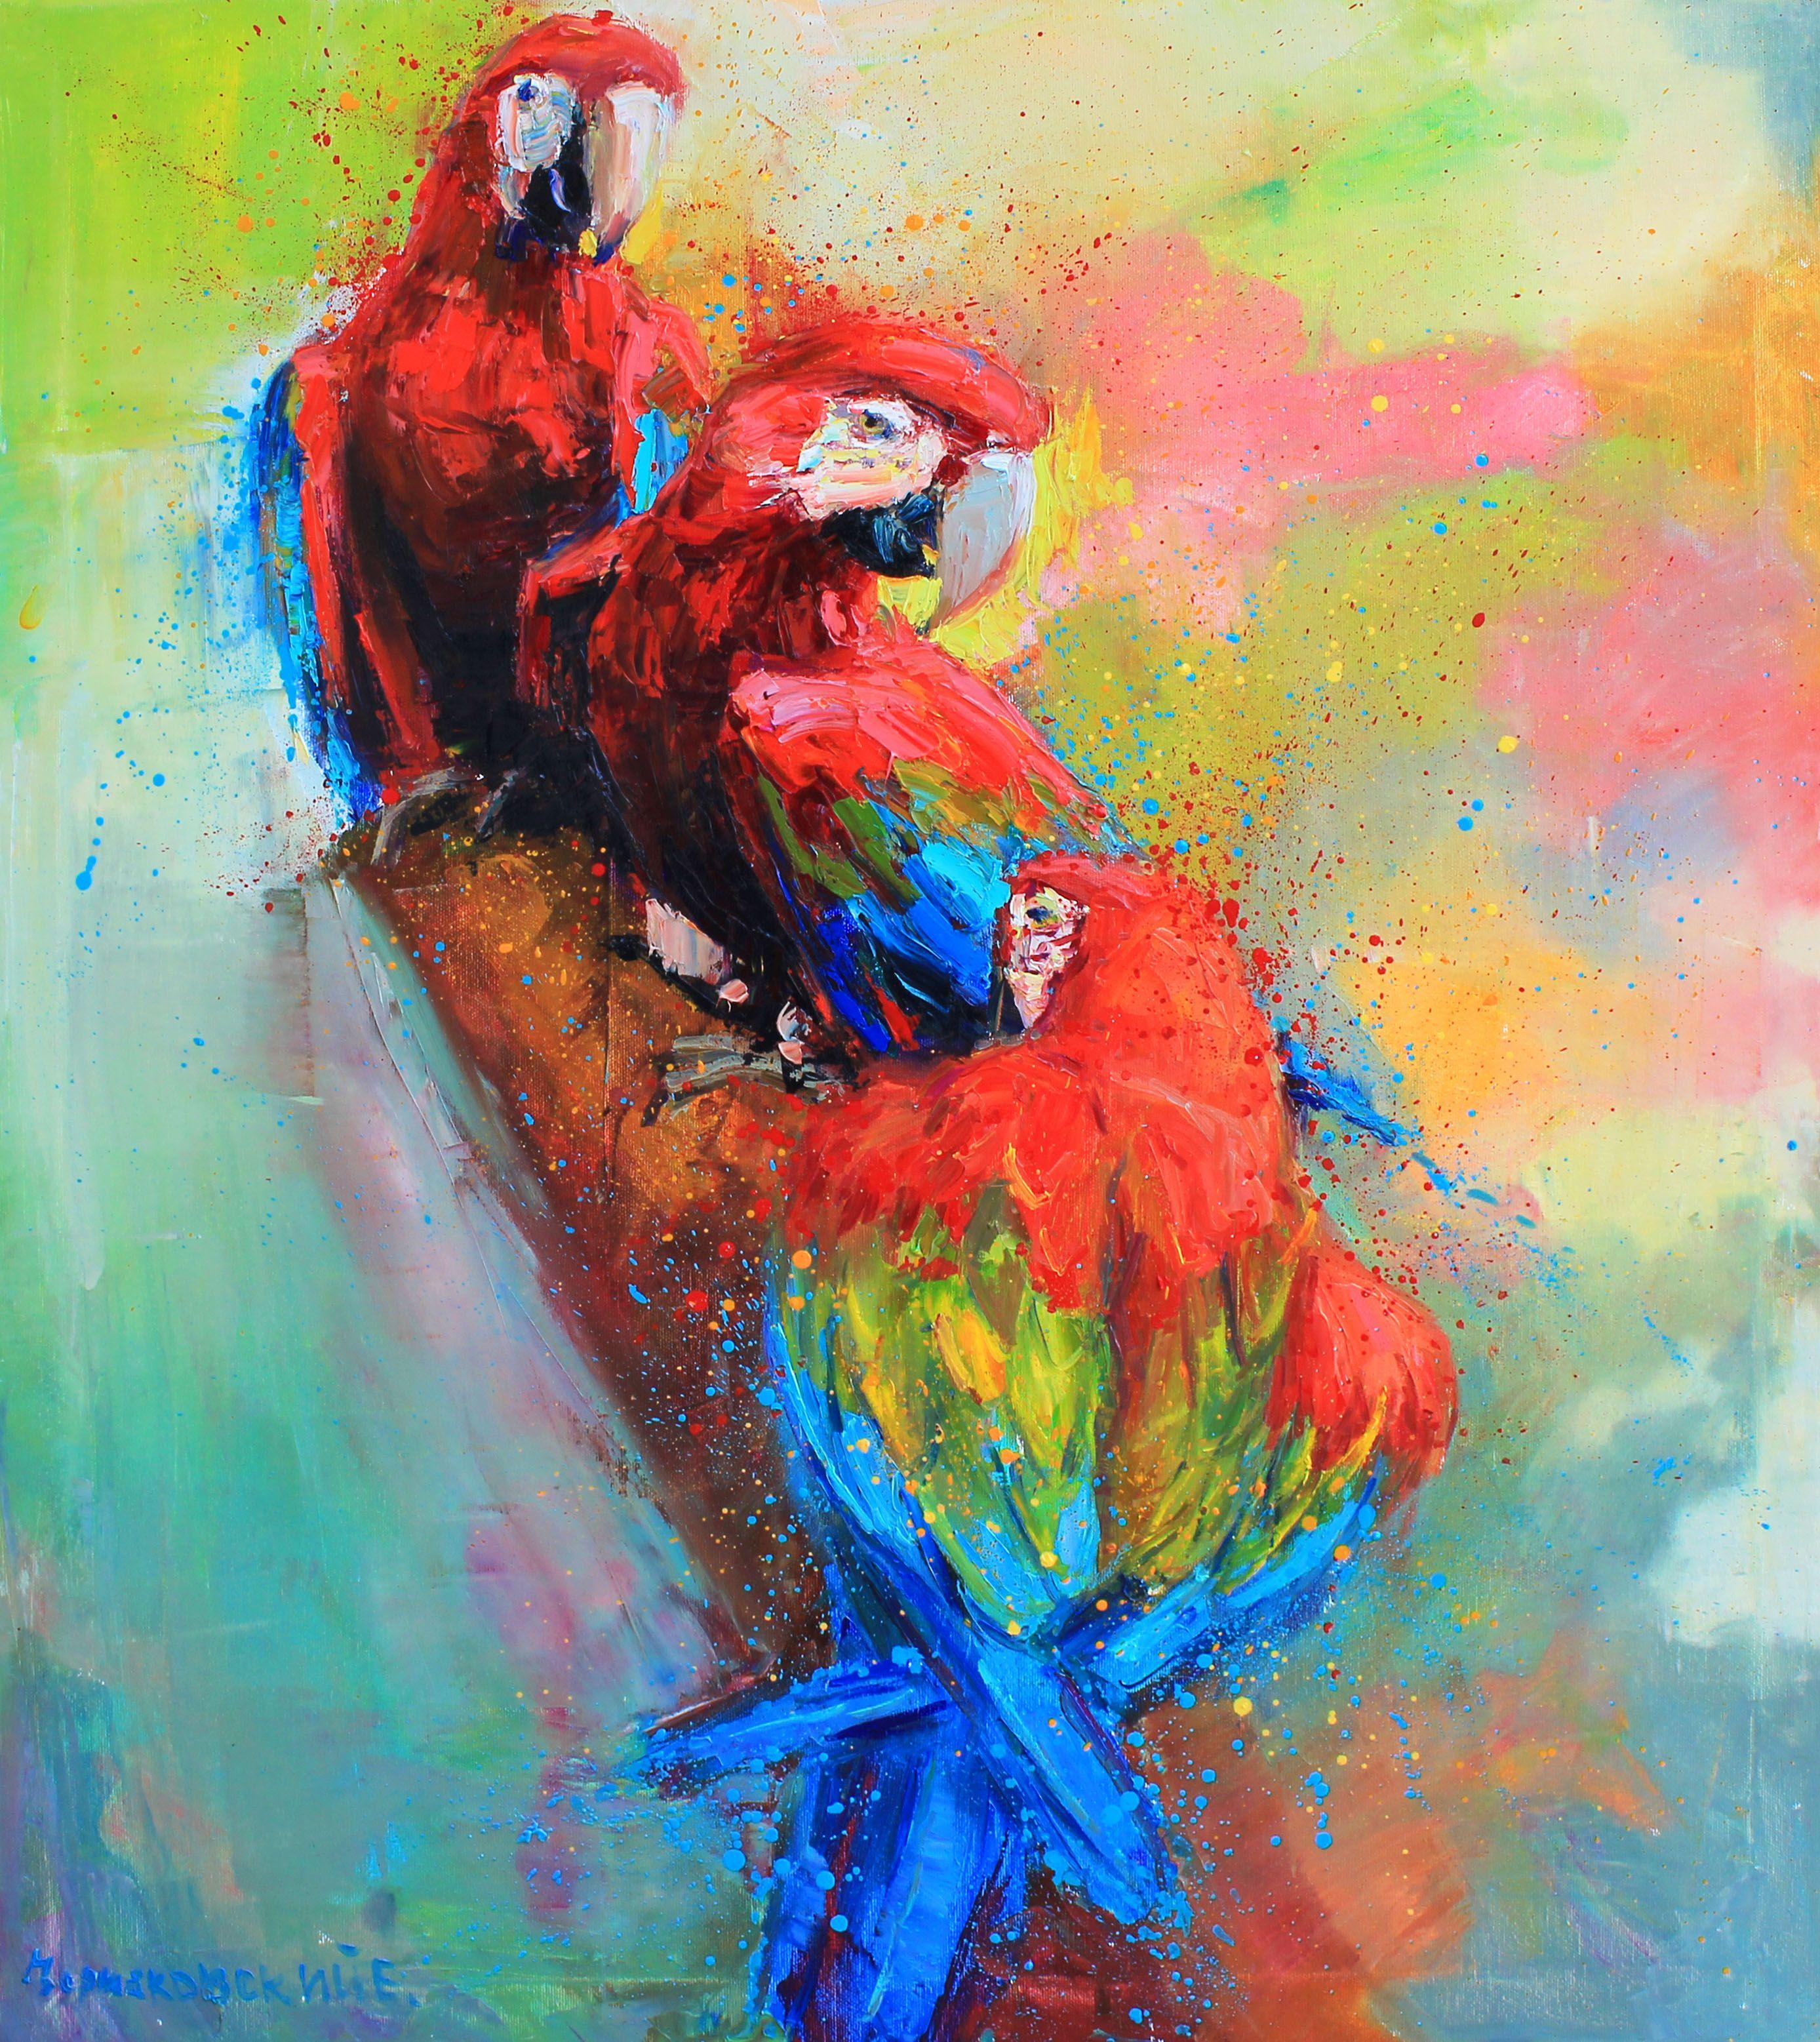 Original Oil painting by Ukrainian artist Evgeny Chernyakovsky    "  Red parrots"  70.0 X 80.0 CM / 27.5 X 31.4 IN  HIGH QUALITY oil on canvas  Signed on the front and back  Dated 2022  Good condition  GUARANTEE OF AUTHENTICITY :: Painting ::